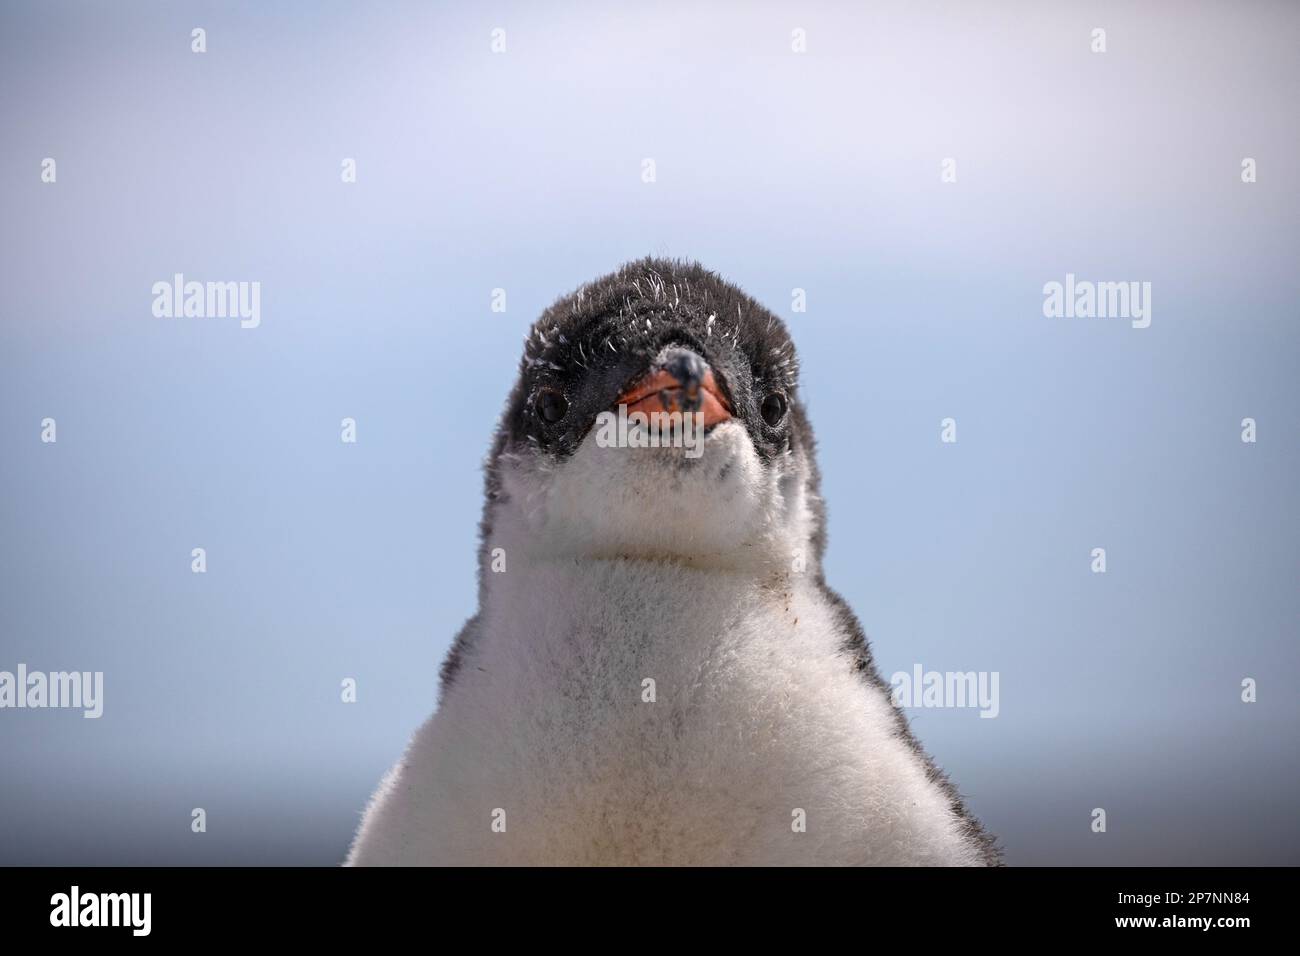 A Gentoo Penguin chick, Pygoscelis Papua,in a colony at Yorke Bay on The Falkland Islands. Stock Photo